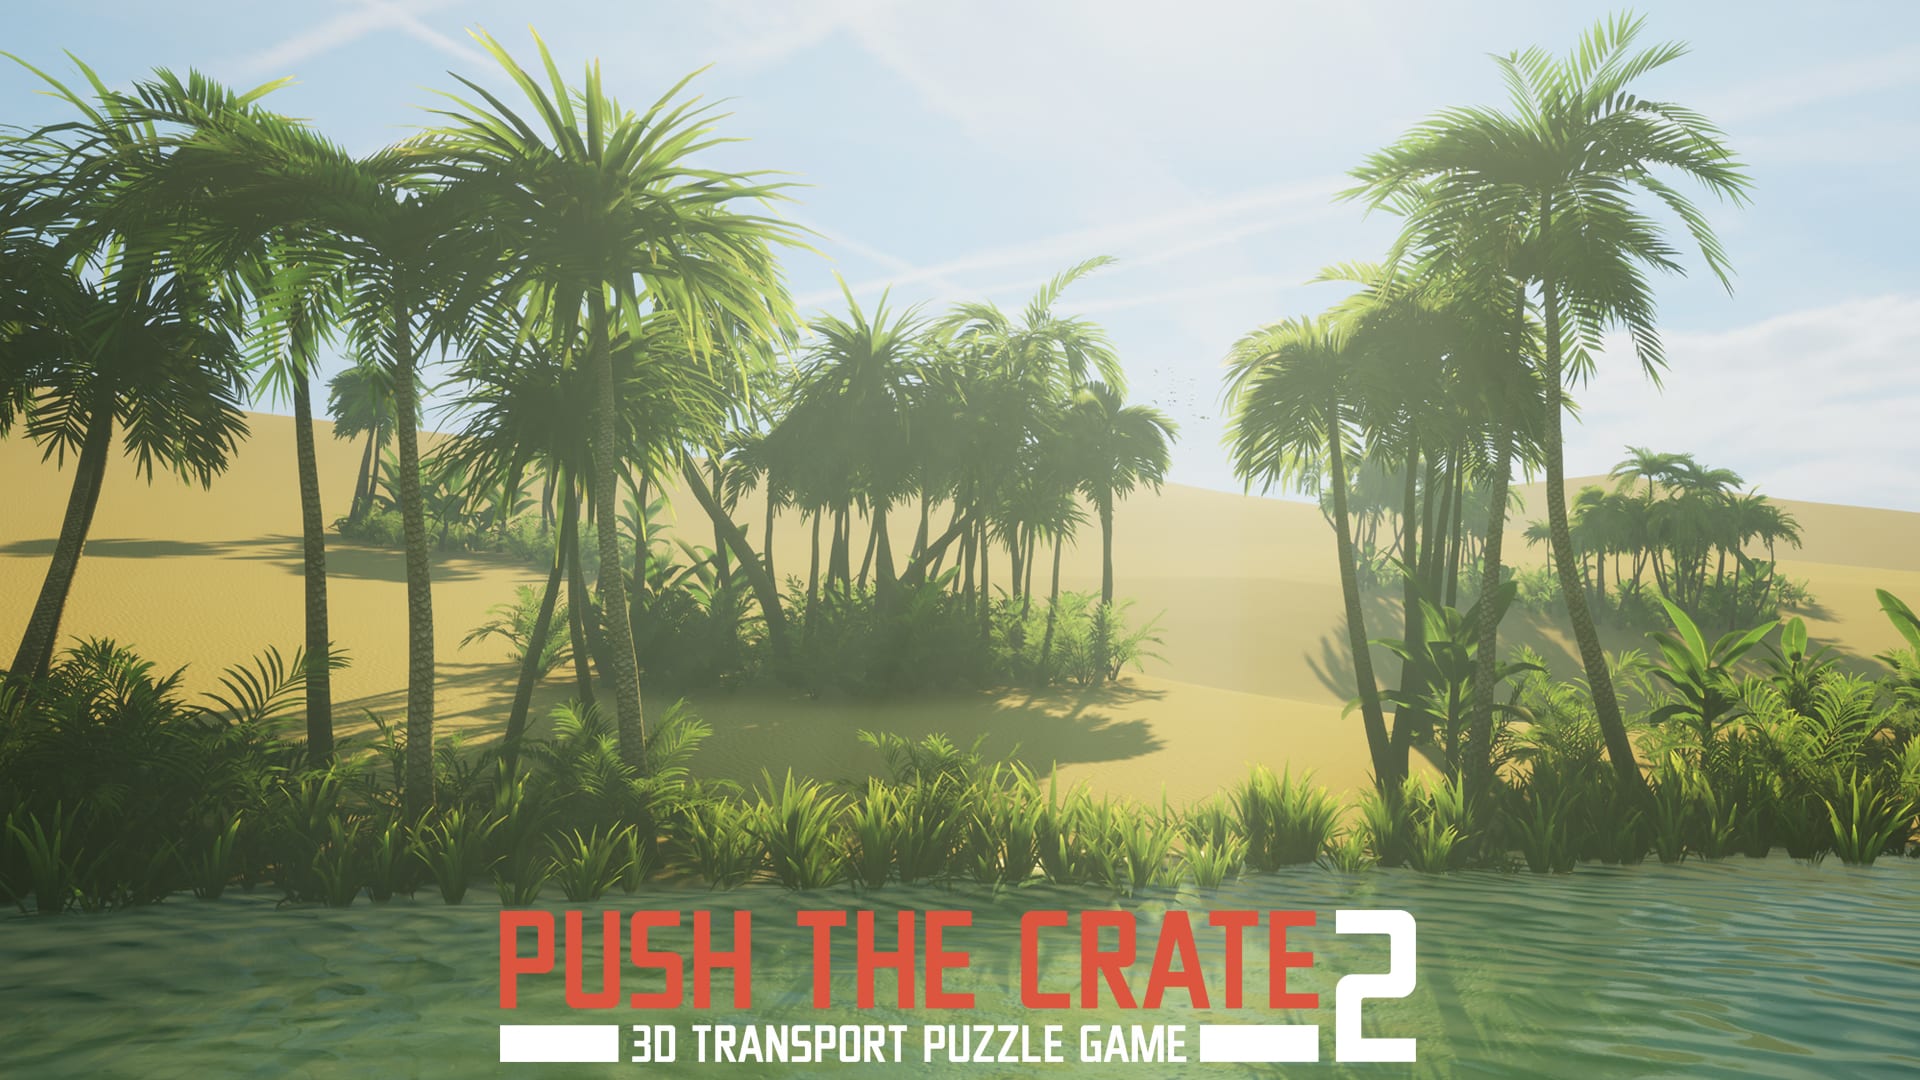 Push the Crate 2